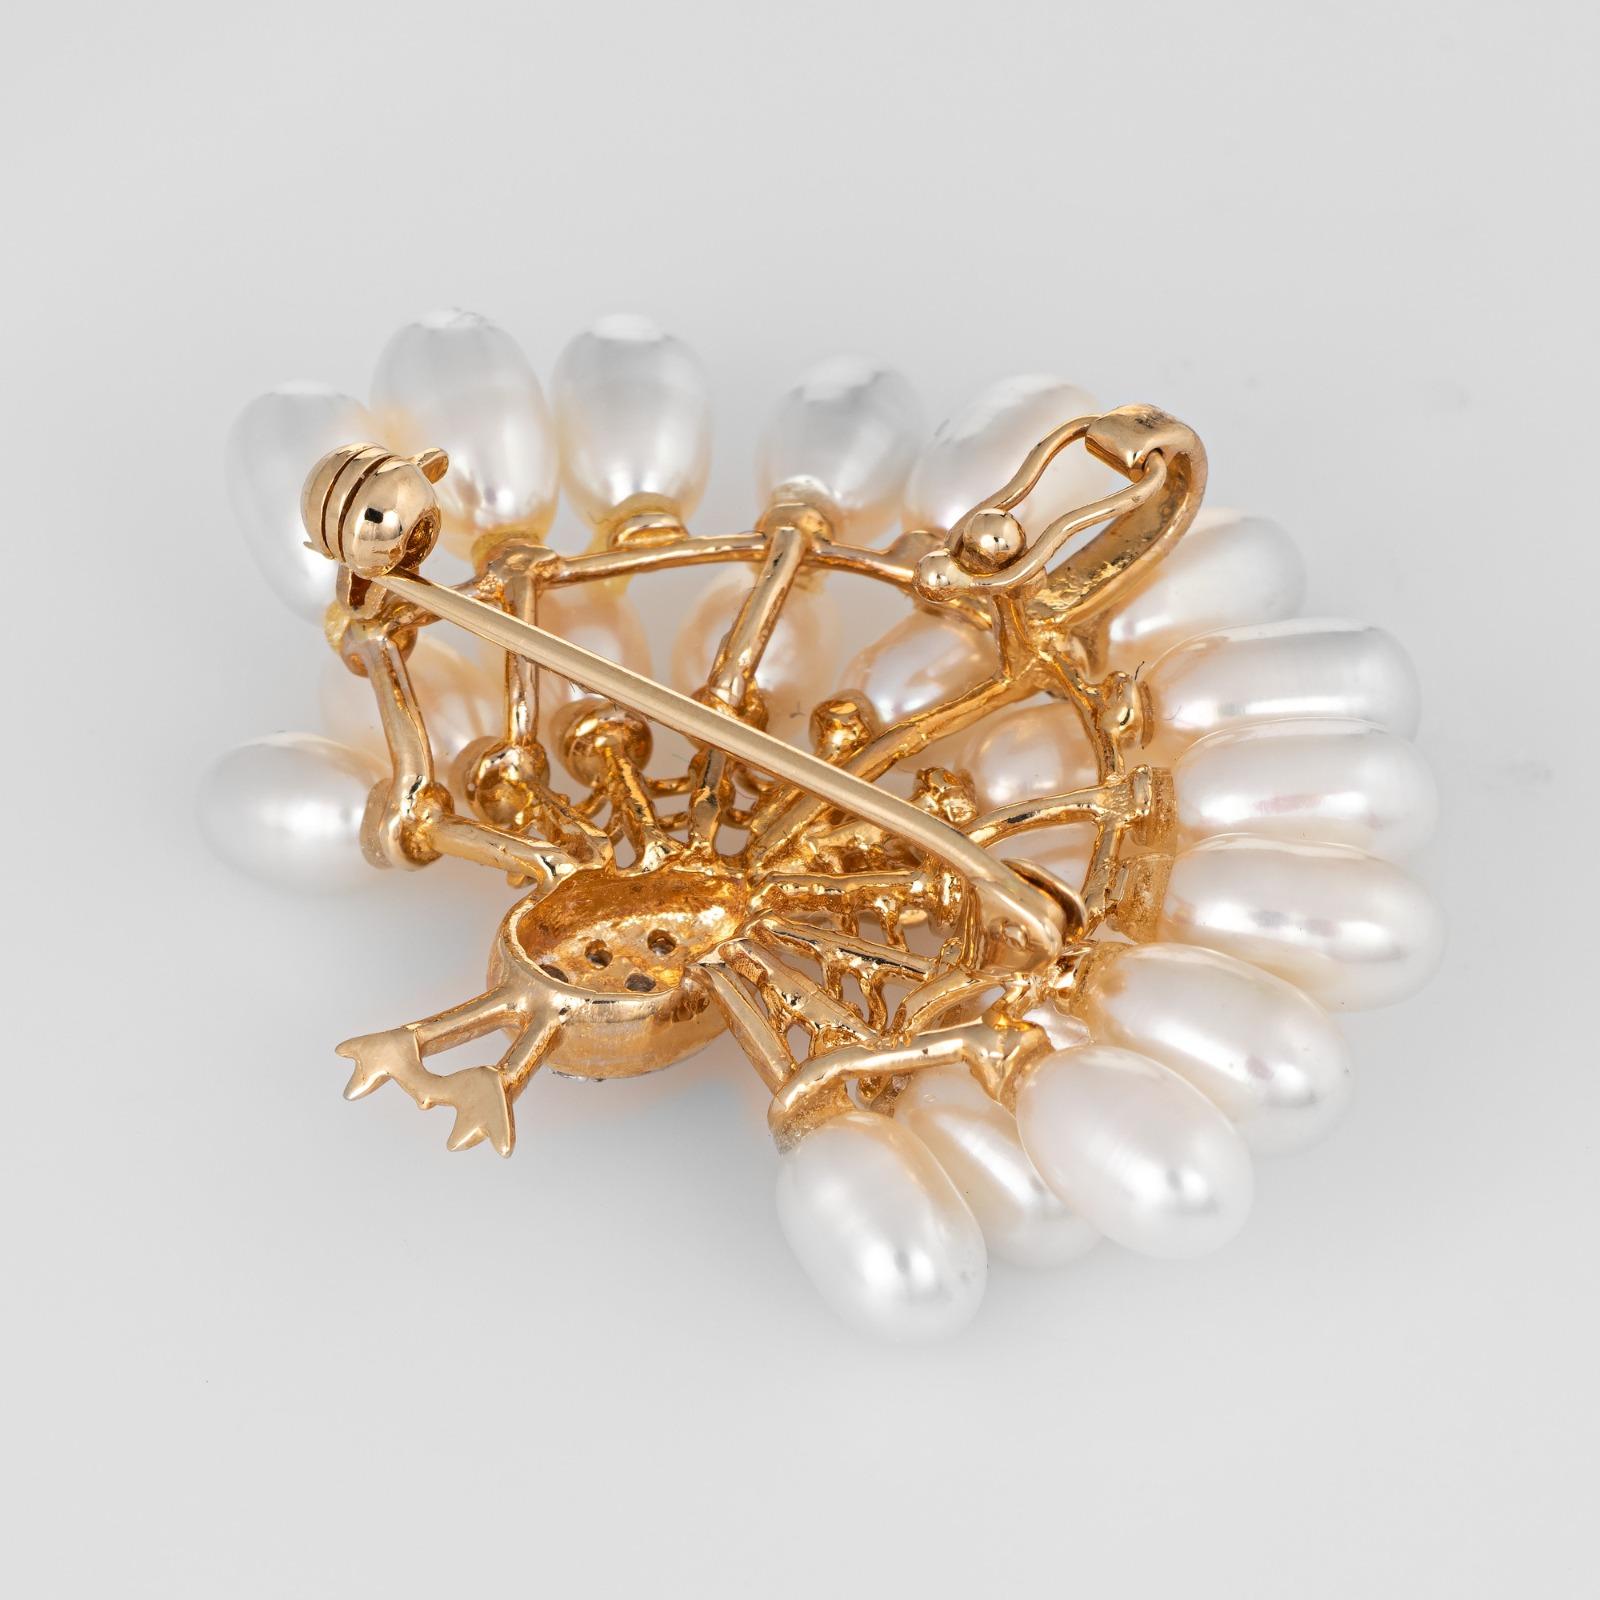 Finely detailed peacock pendant/brooch crafted in 14 karat yellow gold.  

Diamonds total an estimated 0.05 carats (estimated at H-I color and SI1-2 clarity). The freshwater pearls range in size from 6.5mm x 4mm to 7.5mm x 4.5mm.

The elaborate